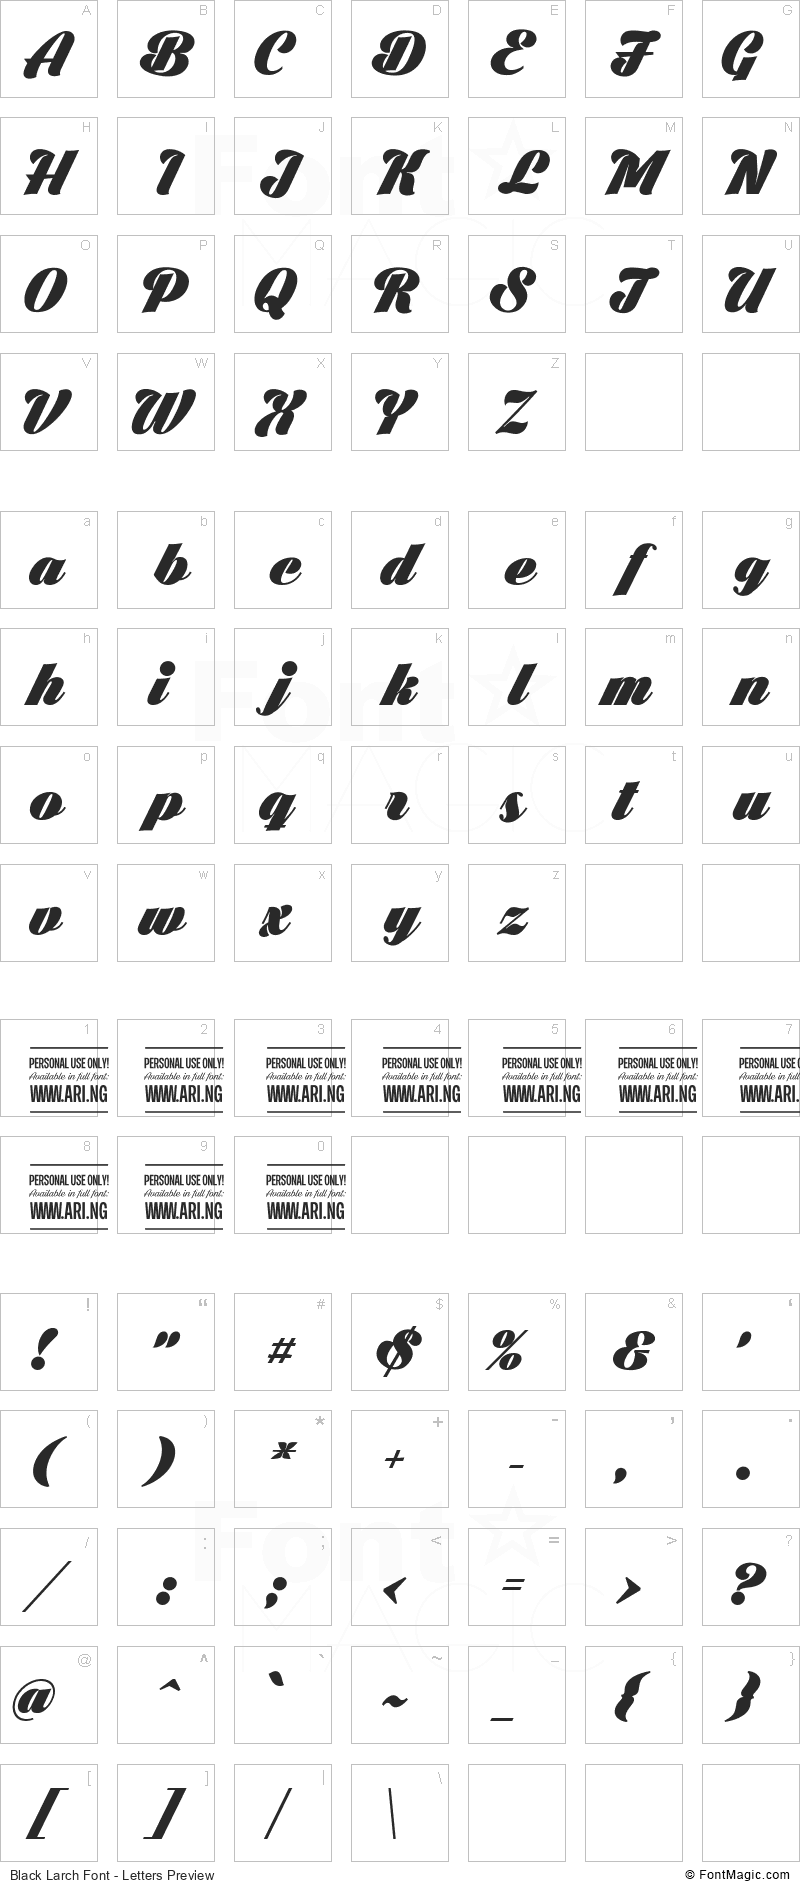 Black Larch Font - All Latters Preview Chart